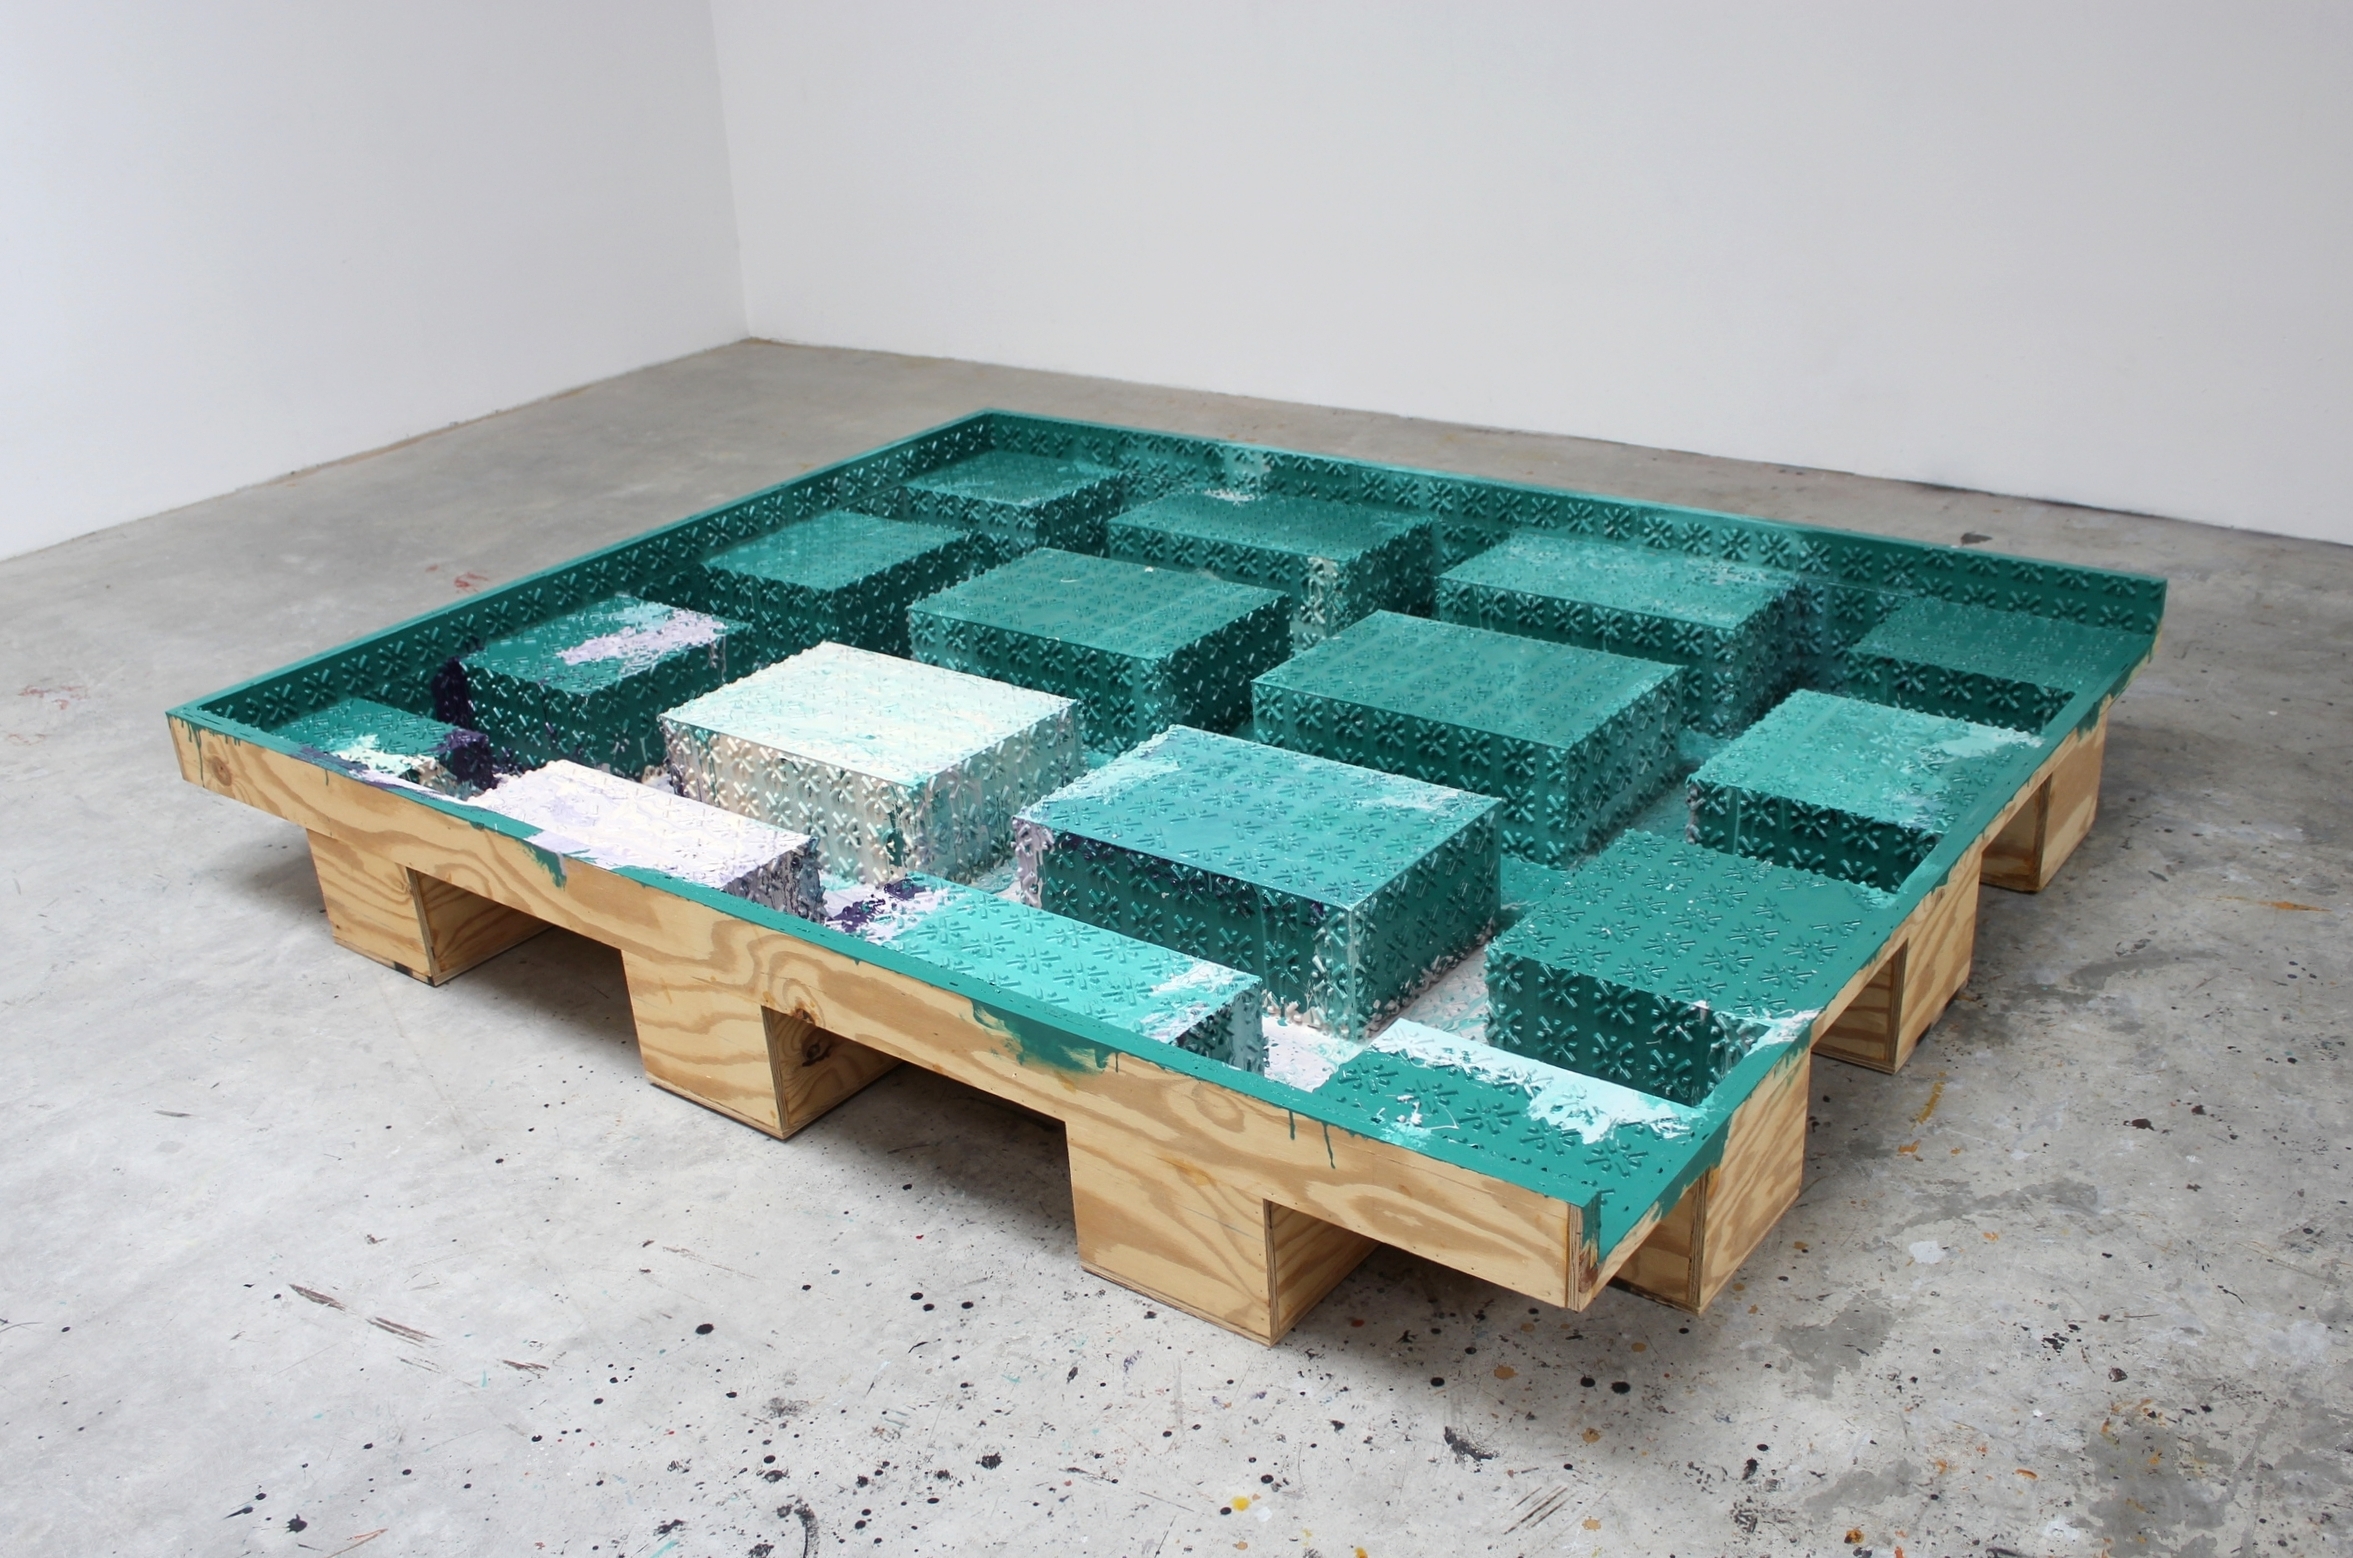  Low Container (Teal Green) 2013 12.25 x 76.5 x 96.5 inches 